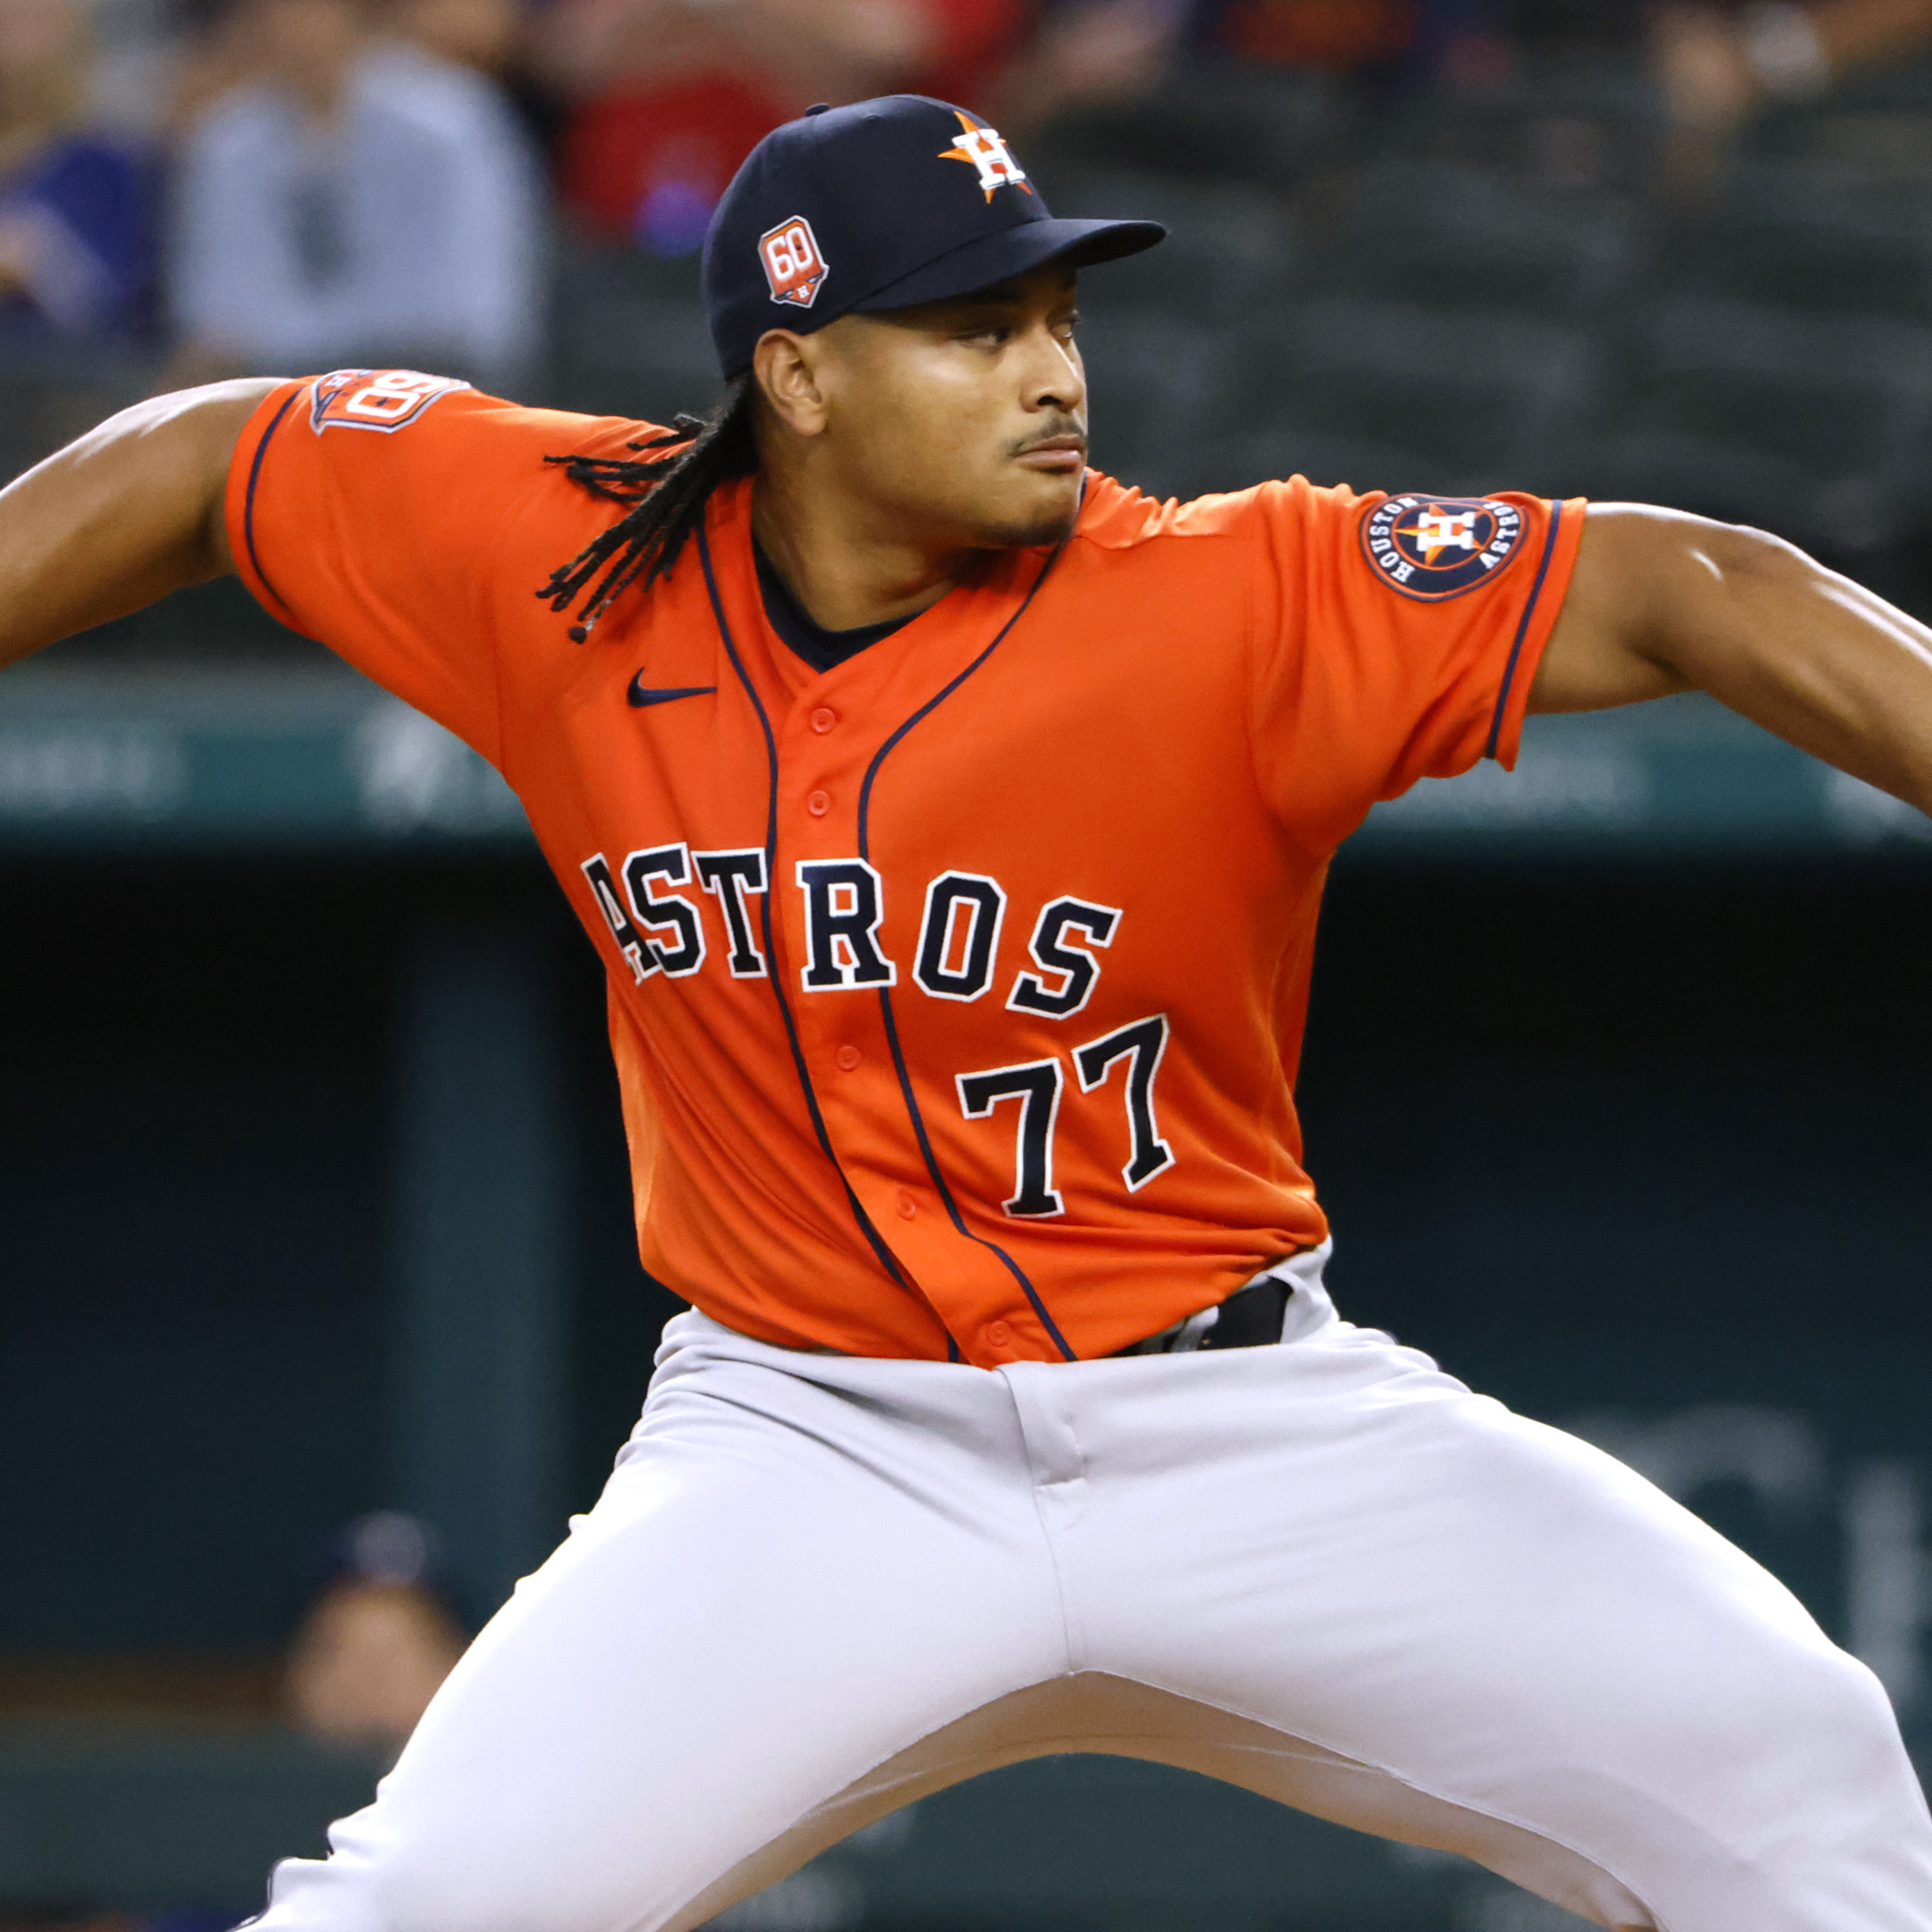 Astros Become 1st Team in MLB History to Throw 2 Immaculate Innings in Same Game